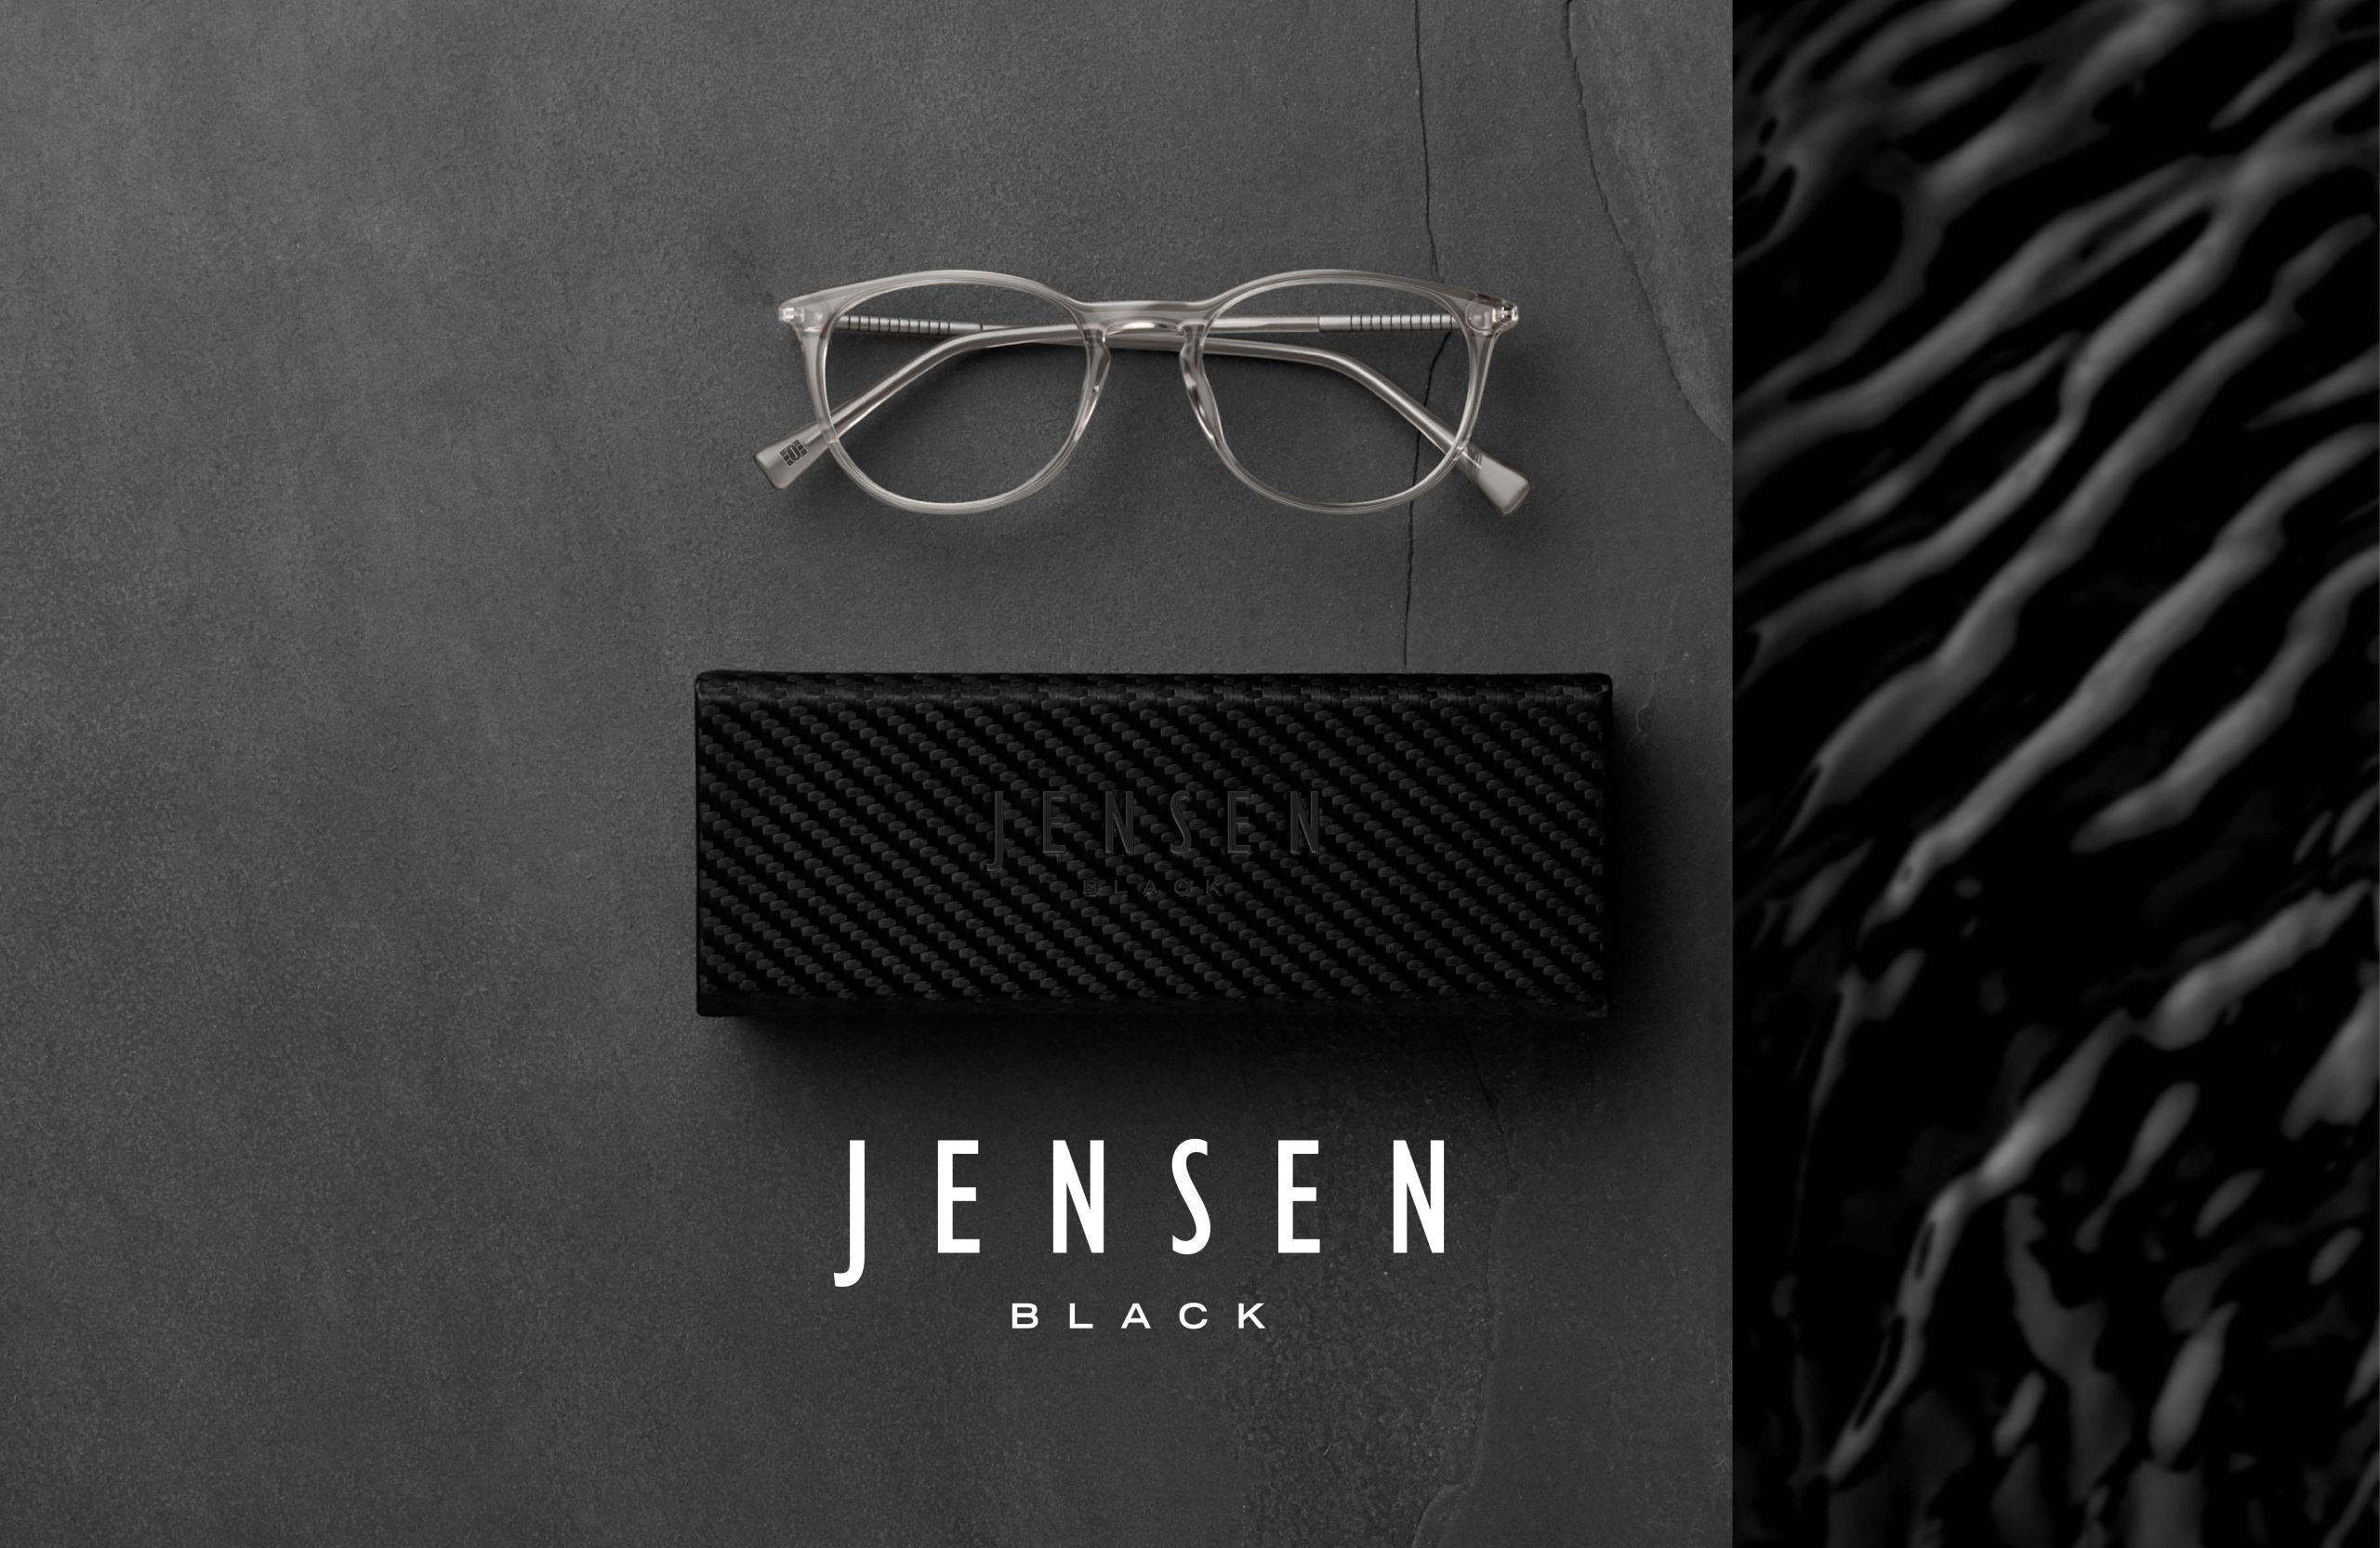 Jensen optical frame in grey crystal with 50mm eyesize